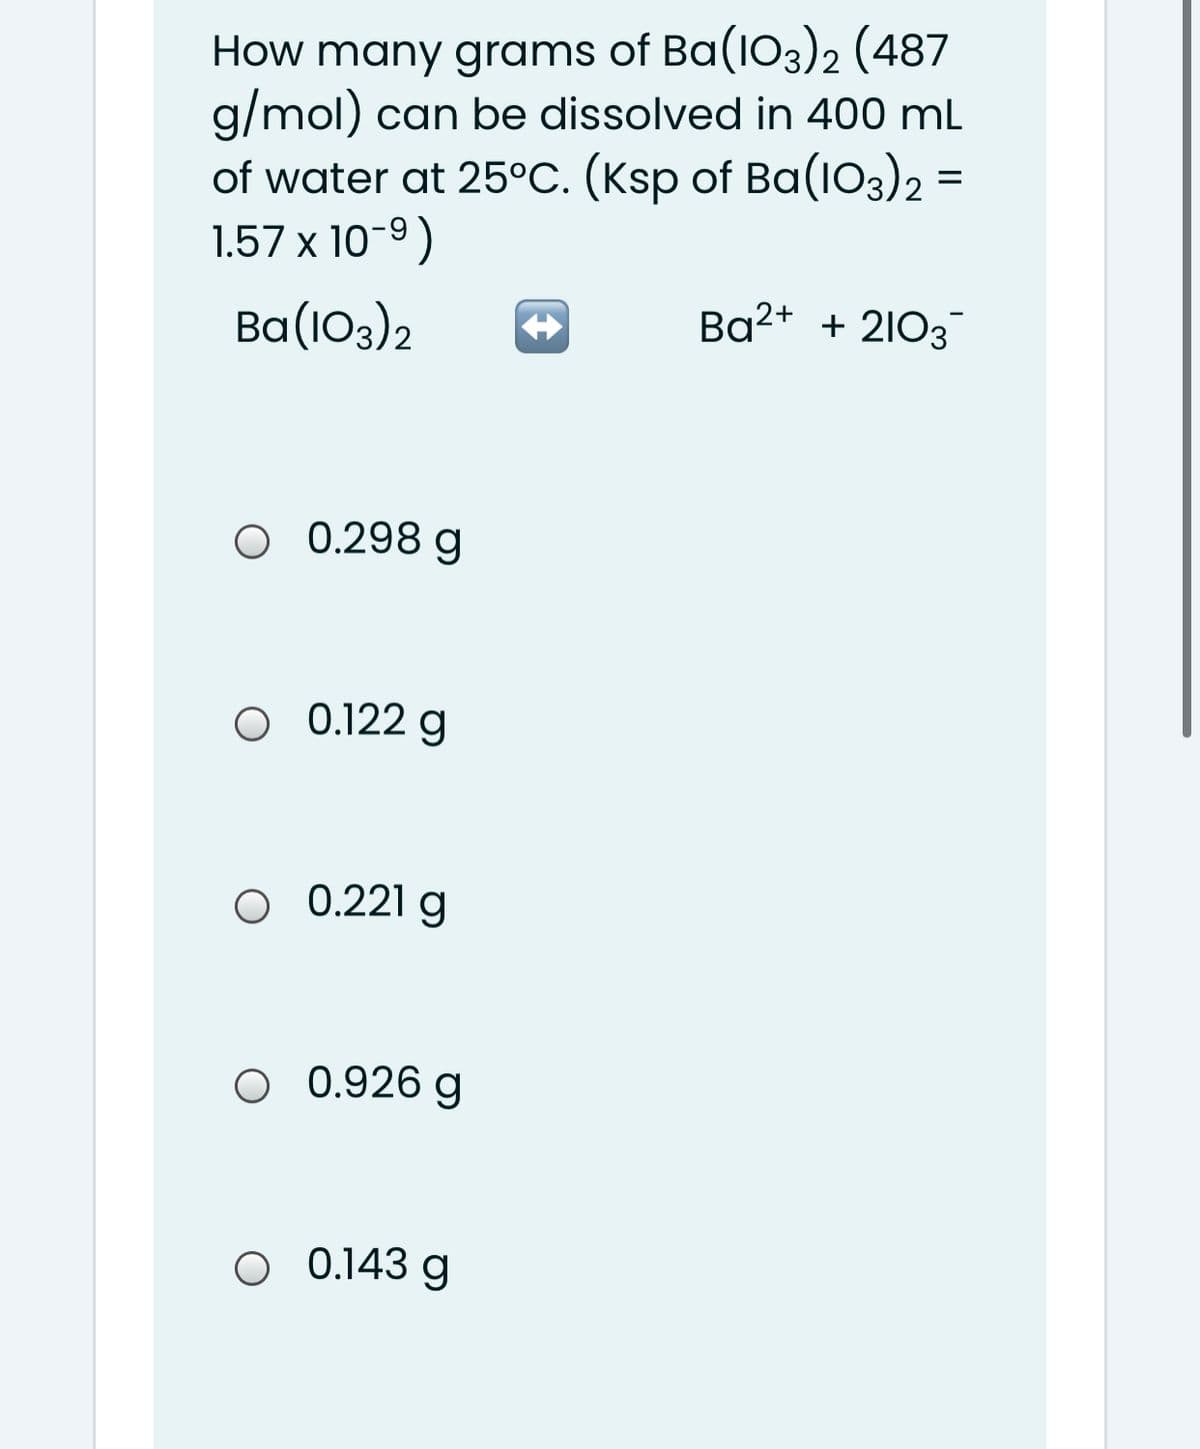 How many grams of Ba(103)2 (487
g/mol) can be dissolved in 400 mL
of water at 25°C. (Ksp of Ba(1O3)2 =
1.57 x 10-9)
Ba(103)2
Ba2+ + 2103
O 0.298 g
0.122 g
0.221 g
O 0.926 g
O 0.143 g
